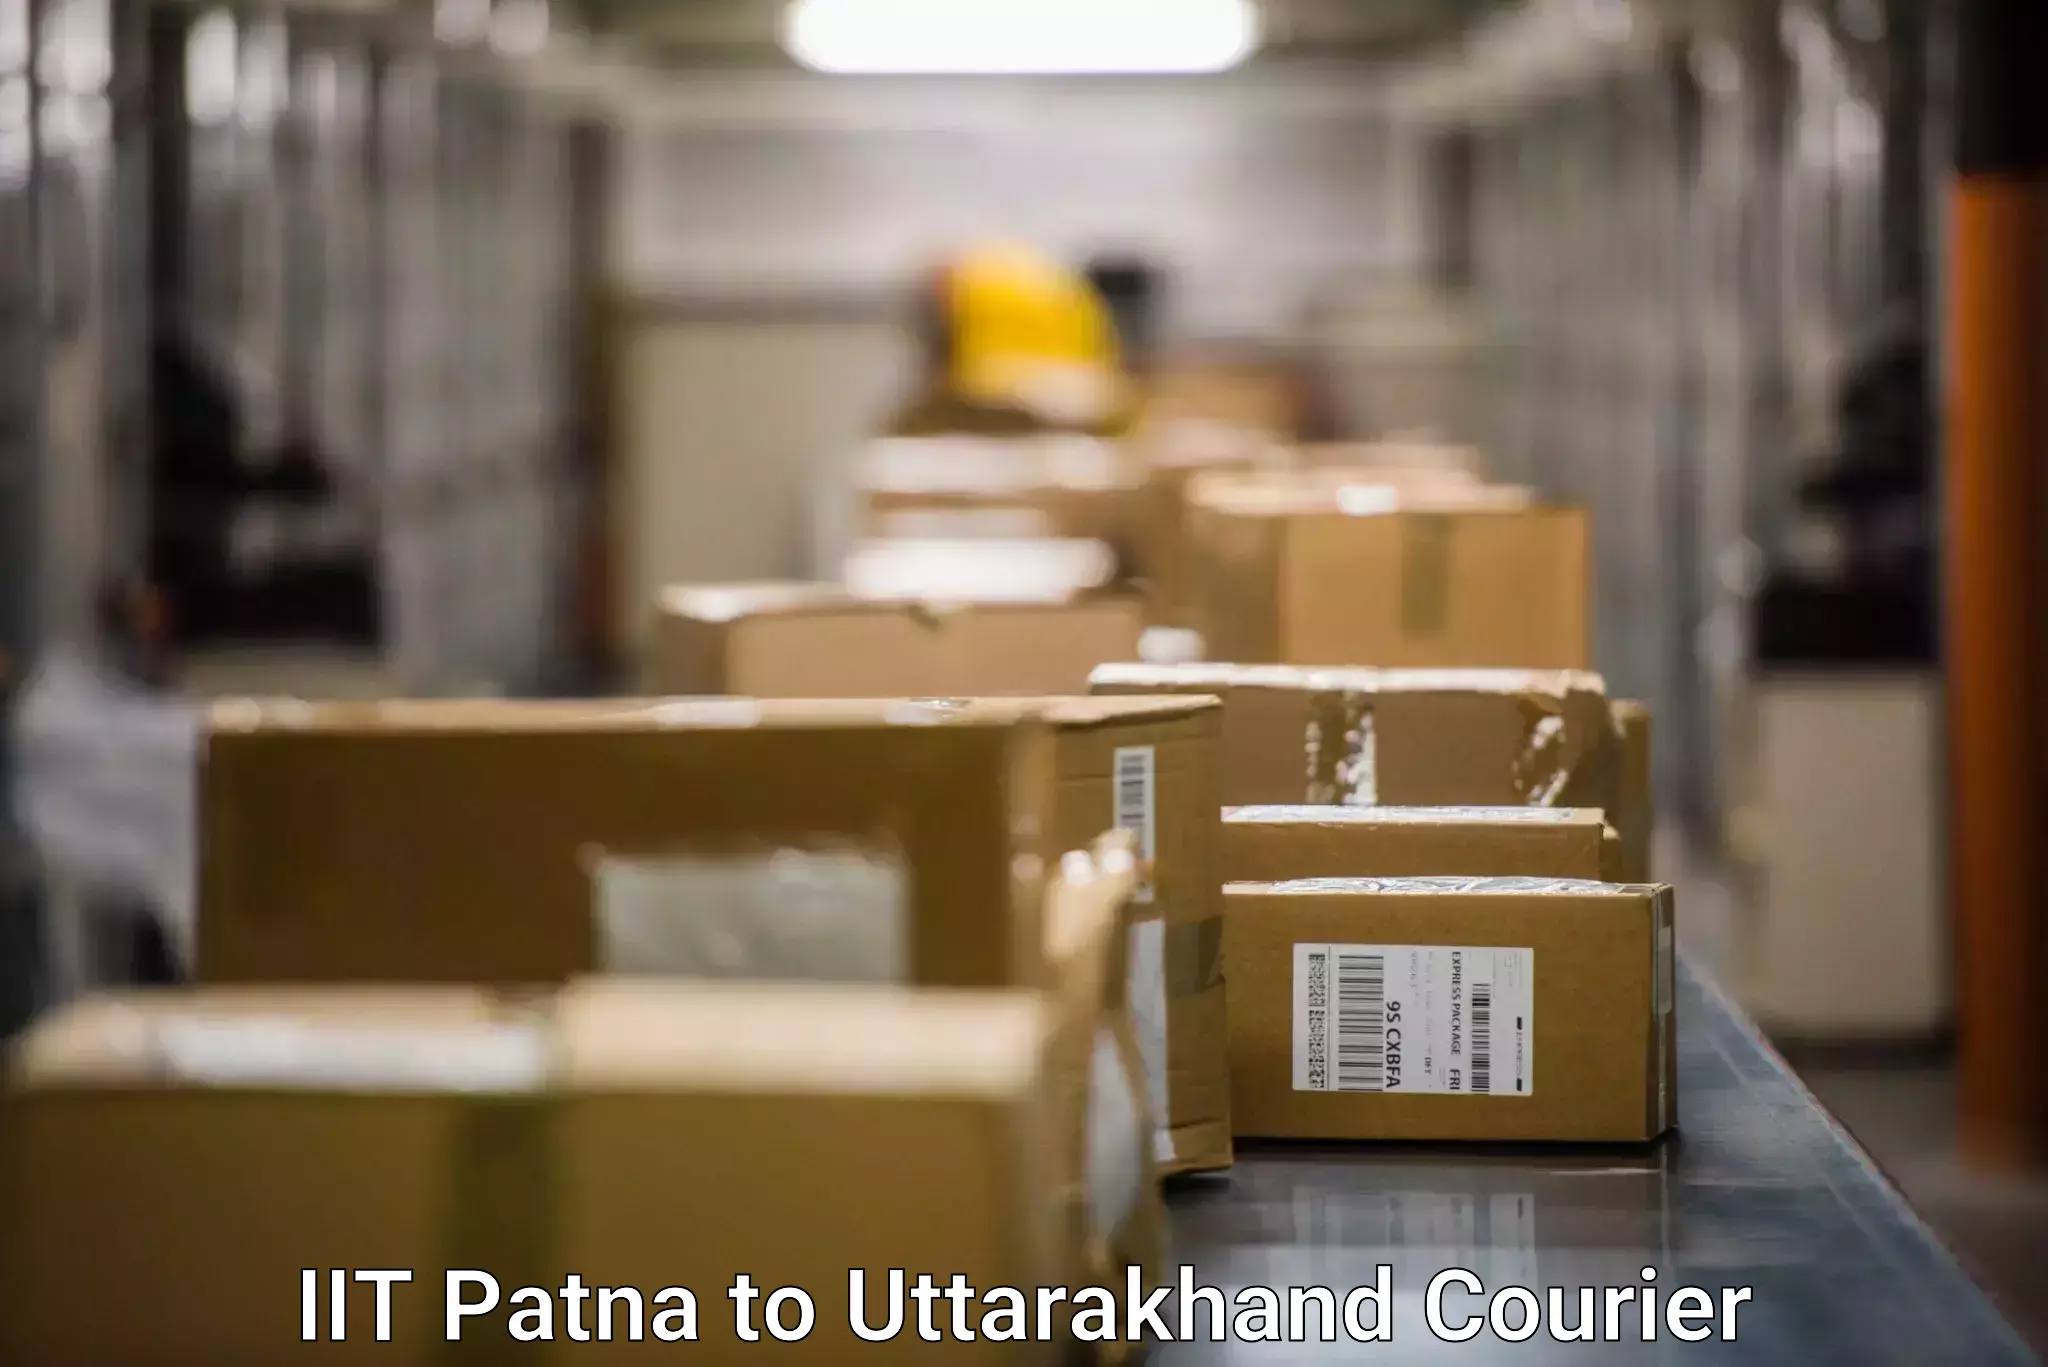 Nationwide delivery network in IIT Patna to Dehradun